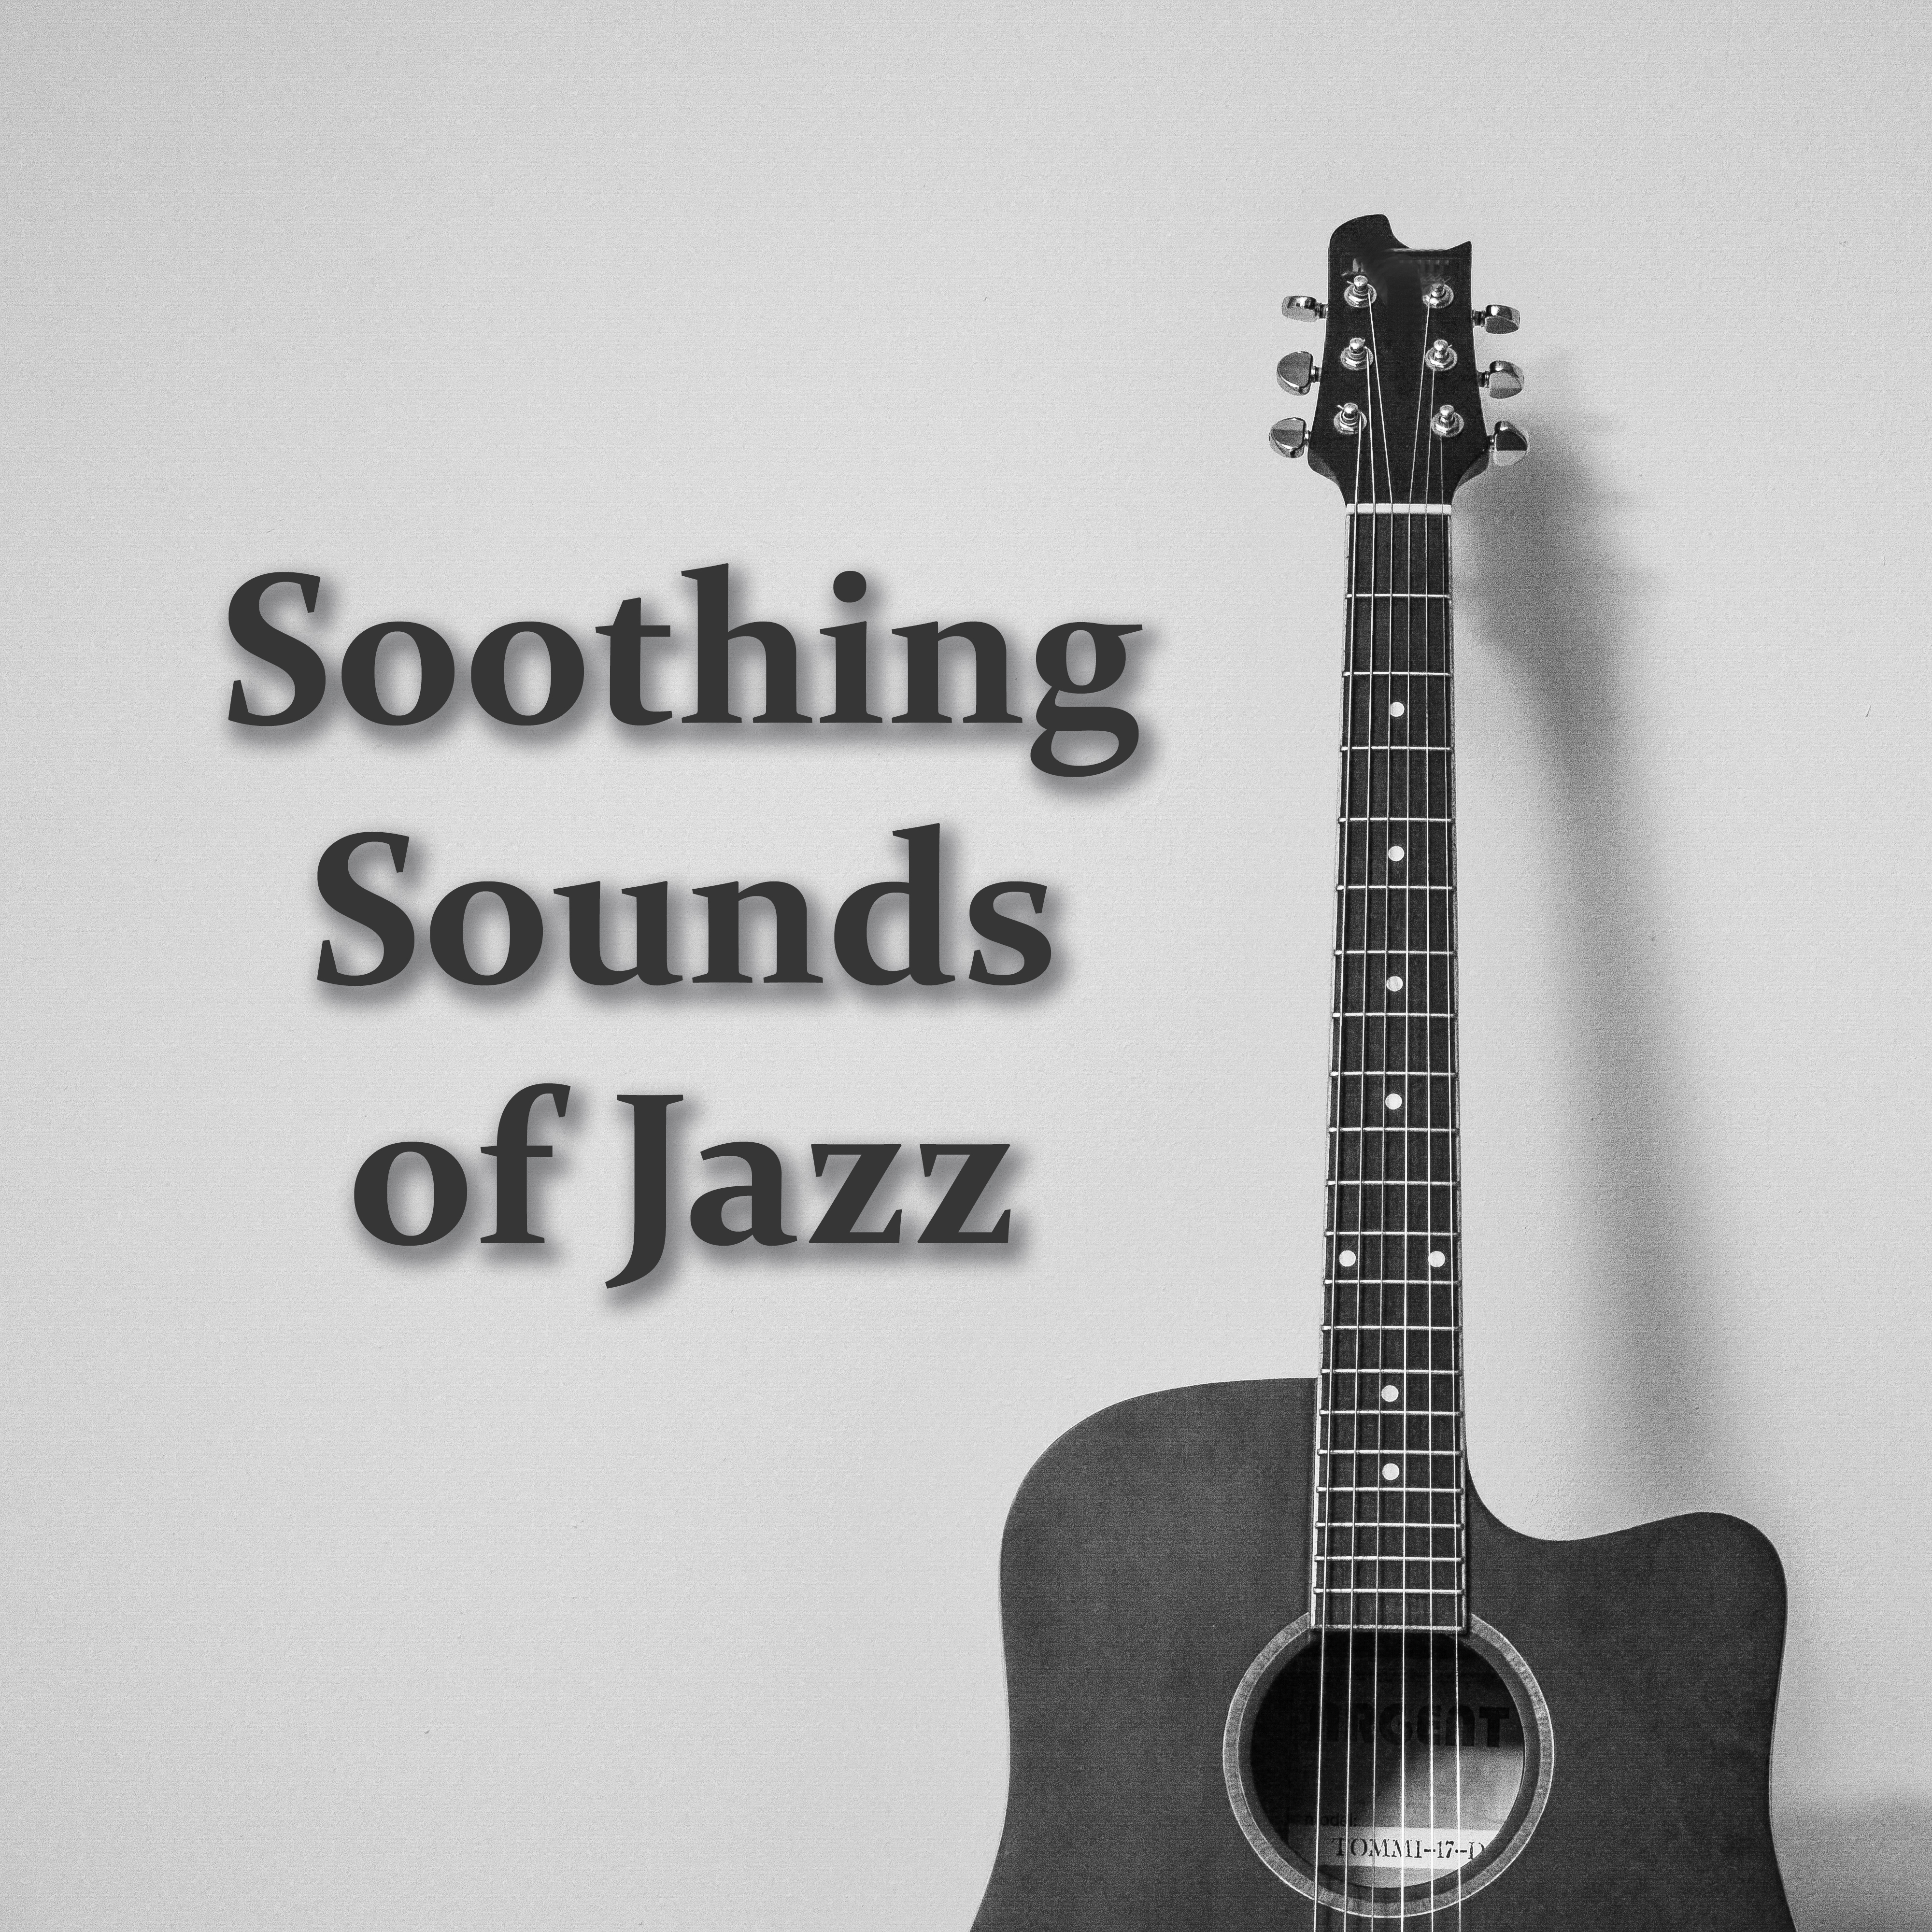 Soothing Sounds of Jazz – Instrumental Music for Sleep, Bedtime, Healing Lullabies at Goodnight, Relax, Restful Sleep, Soothing Jazz